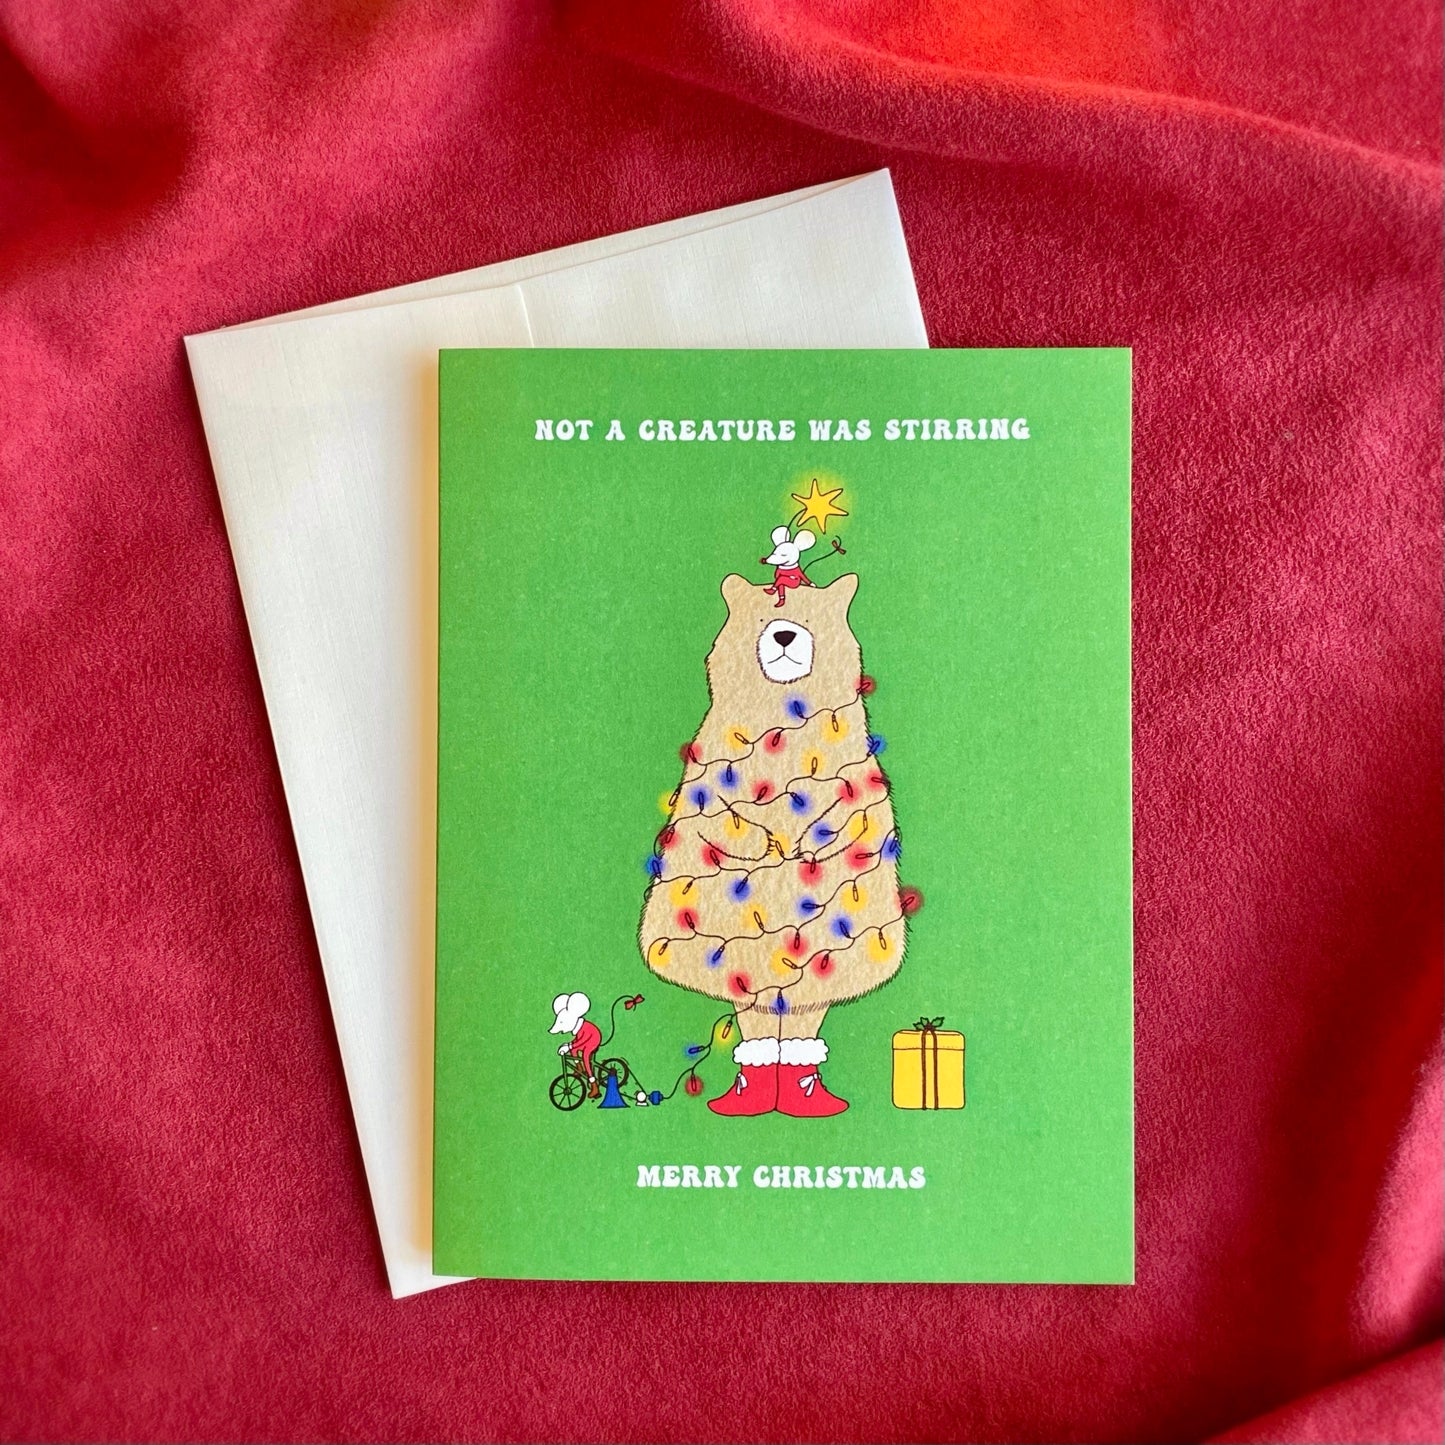 Cute Christmas Card with the text “not a creature was stirring, Merry Christmas” and the illustration of a bear as a Christmas tree and two mice on a green background